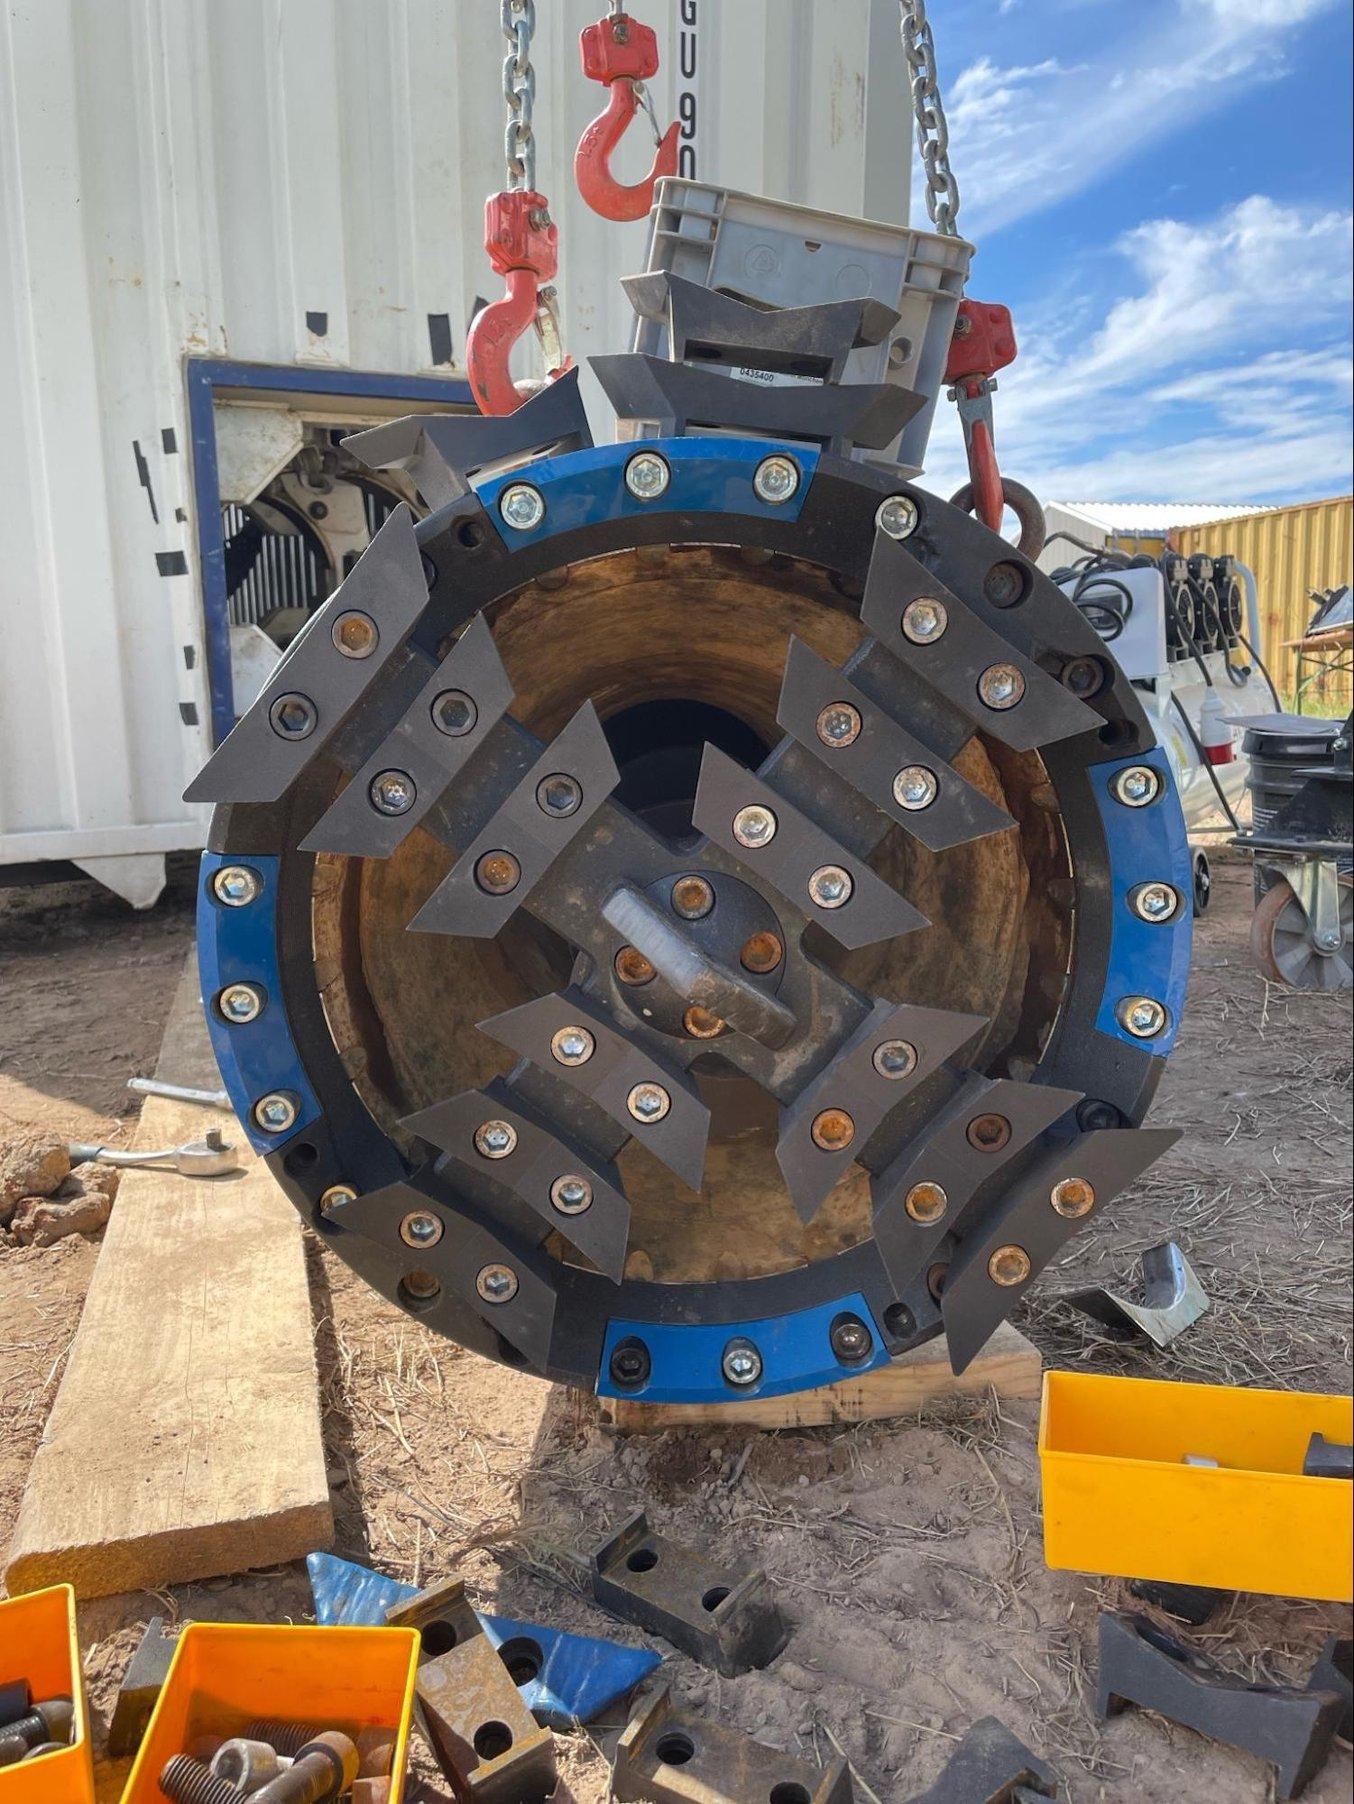 The tunnel boring machine cutting wheel with 3D printed cutting tools